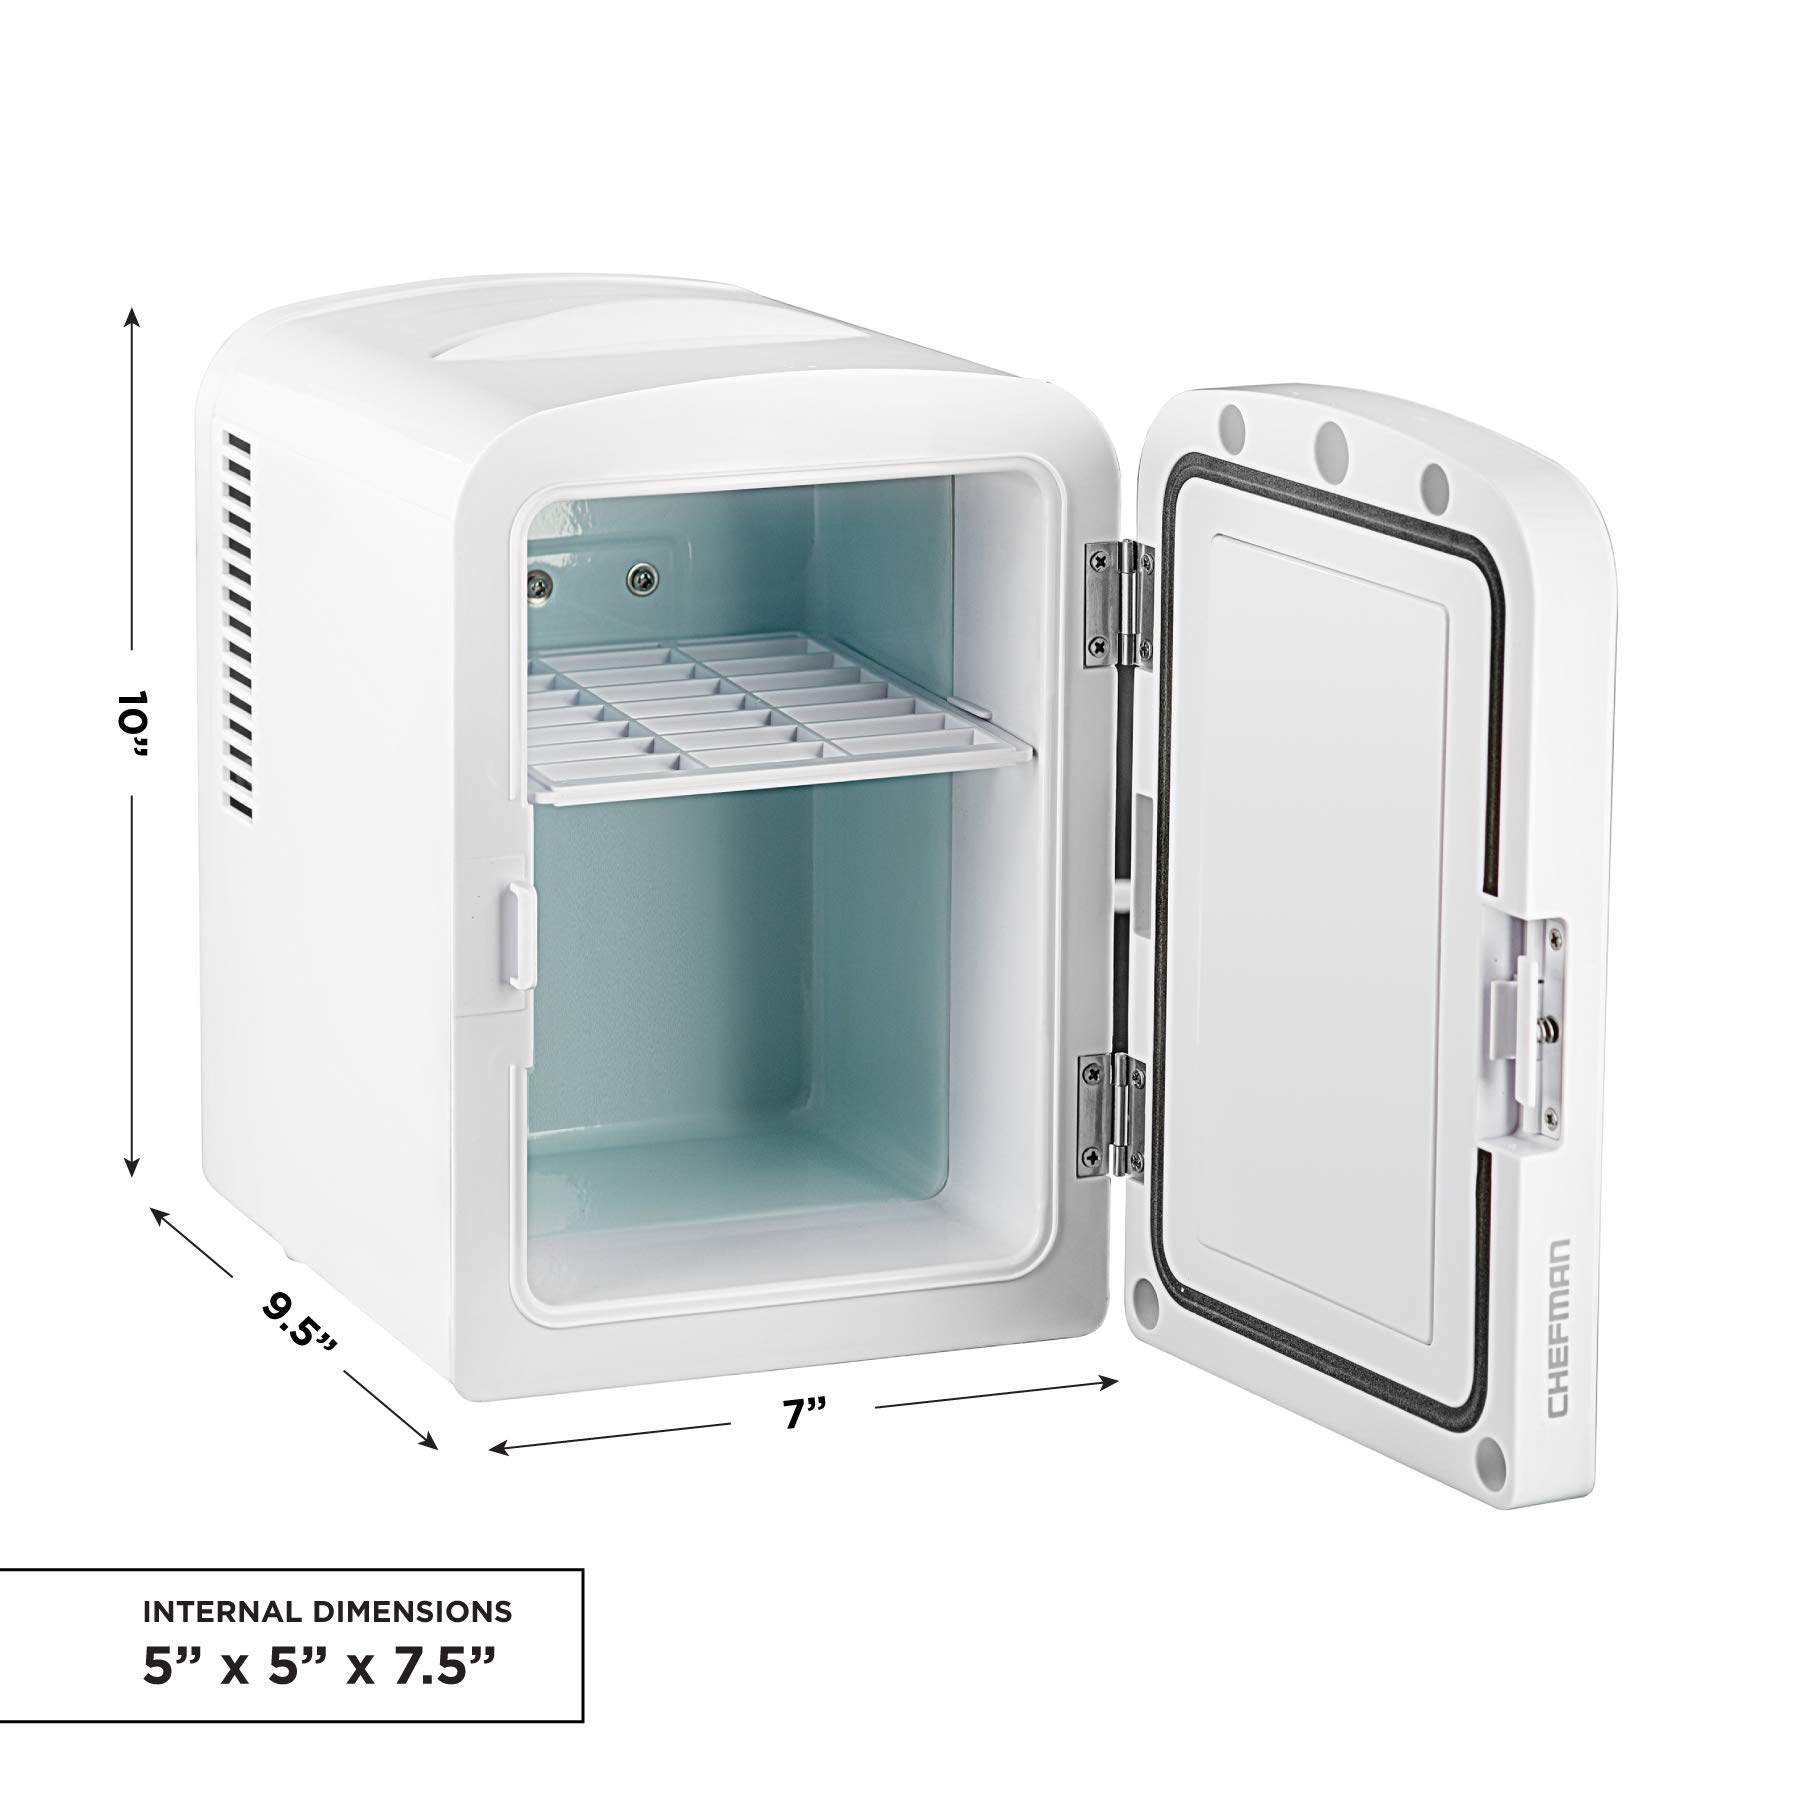 Chefman Portable Mirrored Personal Fridge, 4 Liter Mini Refrigerator, Skin Care, Makeup Storage, Beauty, Serums And Face Masks, Small For Desktop Or Travel, Cool & Heat, Cosmetic Application